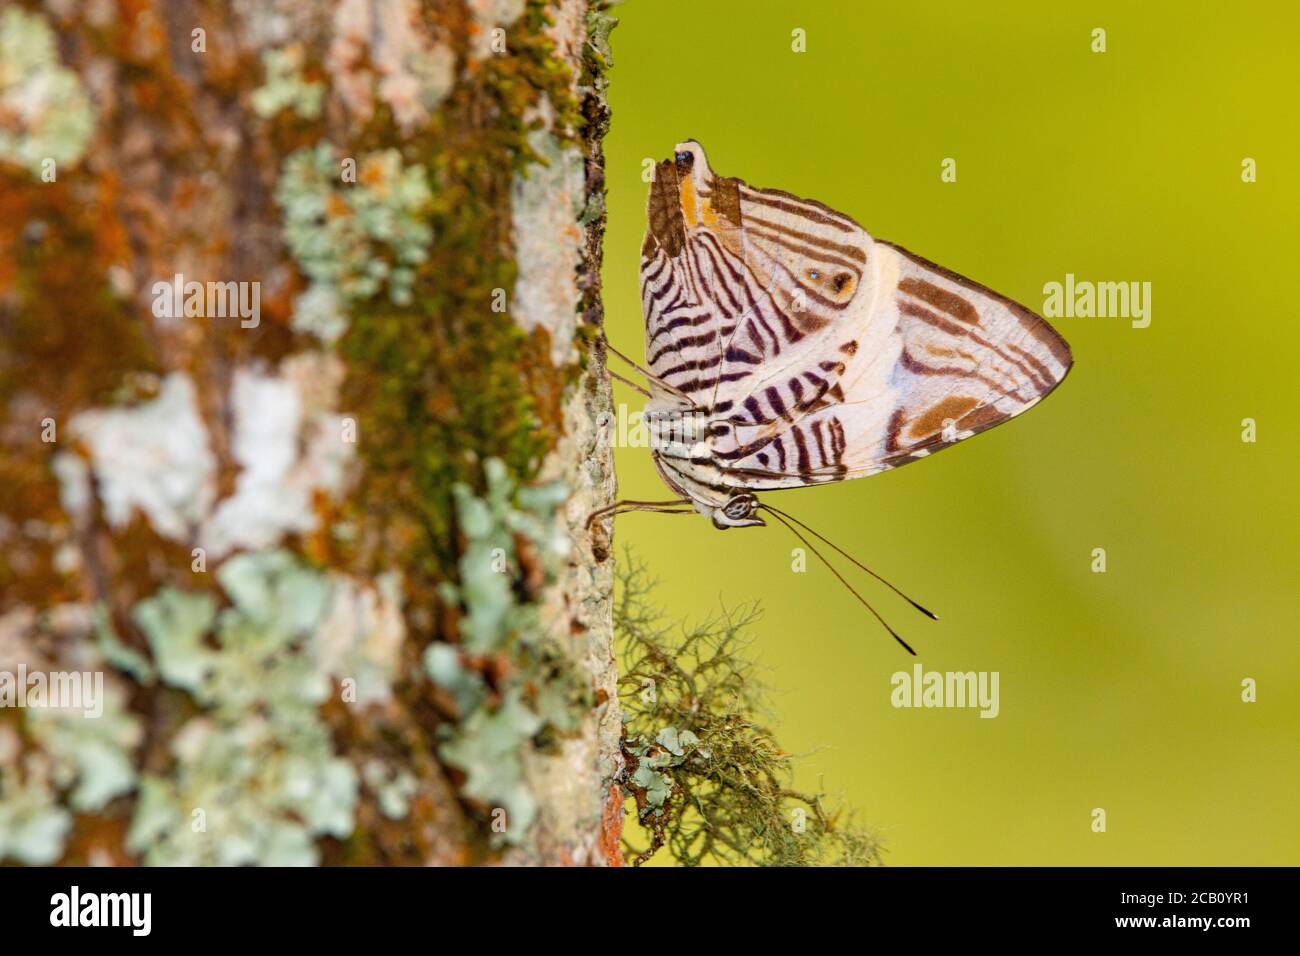 Dirce beauty, mosaic or zebra mosaic (Colobura dirce), is a butterfly of the family Nymphalidae. Icononzo, Tolima, Colombia Stock Photo